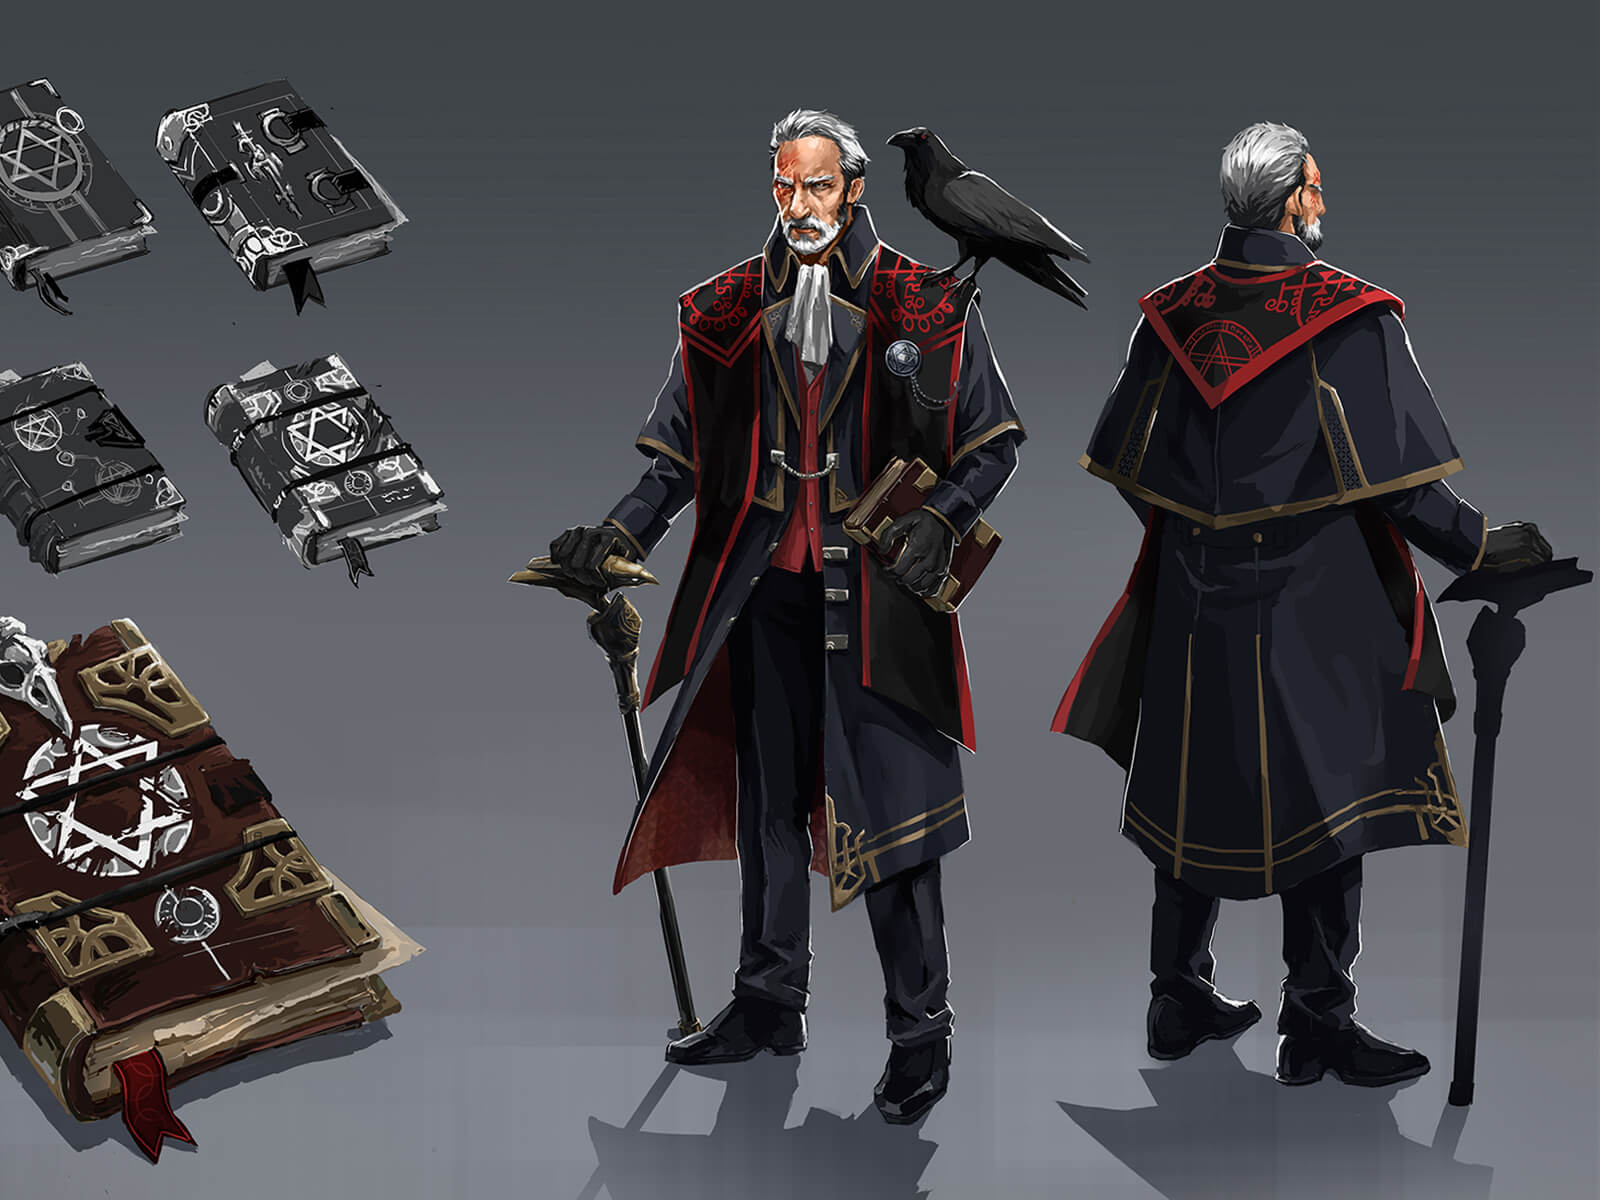 An old man in steampunk-style wear with a raven on his shoulder, with development sketches of his ornate cane and journal.